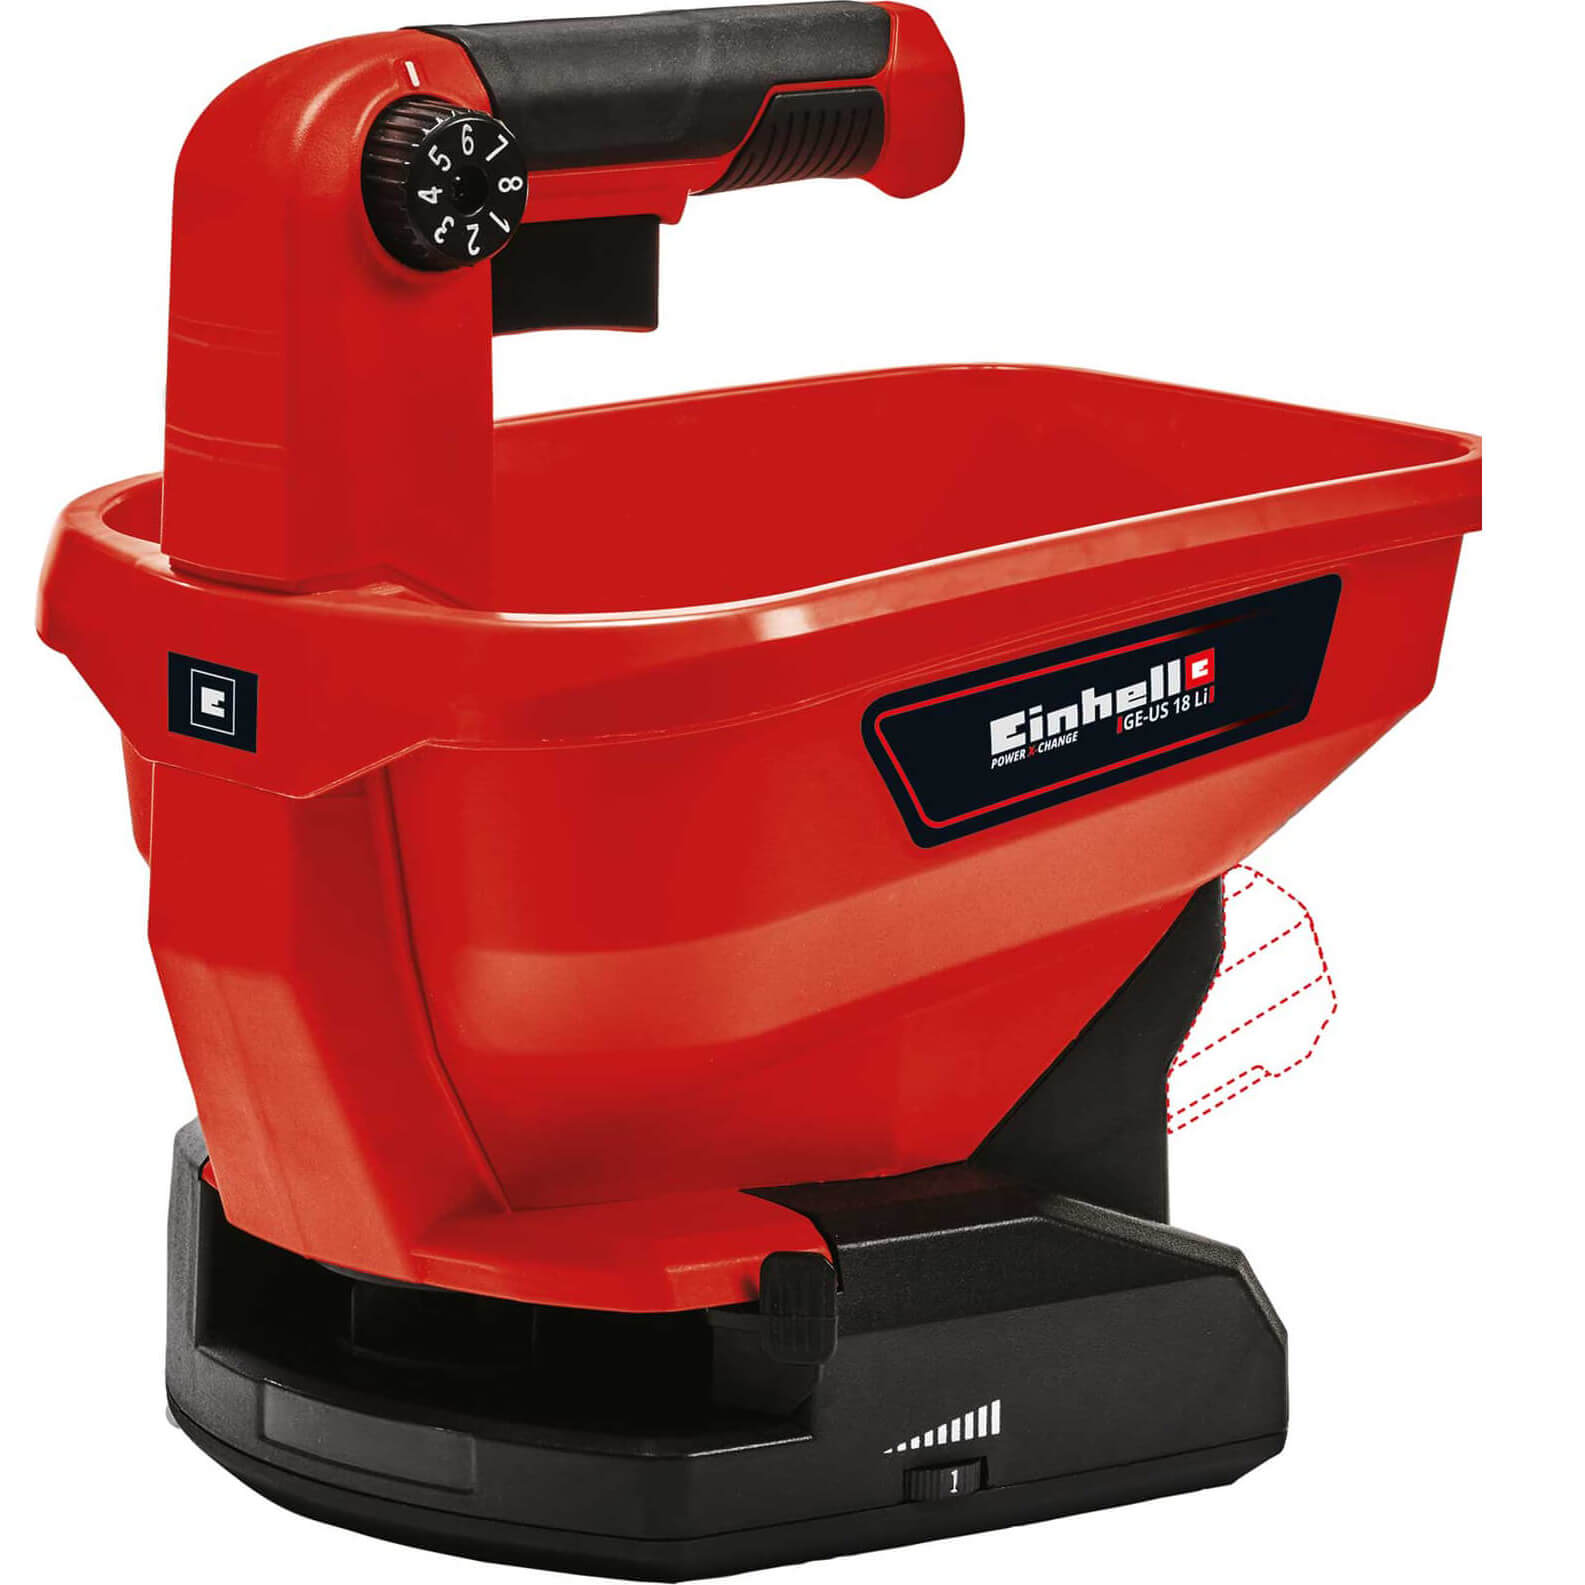 Photo of Einhell Ge-us 18 Li Grass- Salt And Seed Spreader No Batteries No Charger